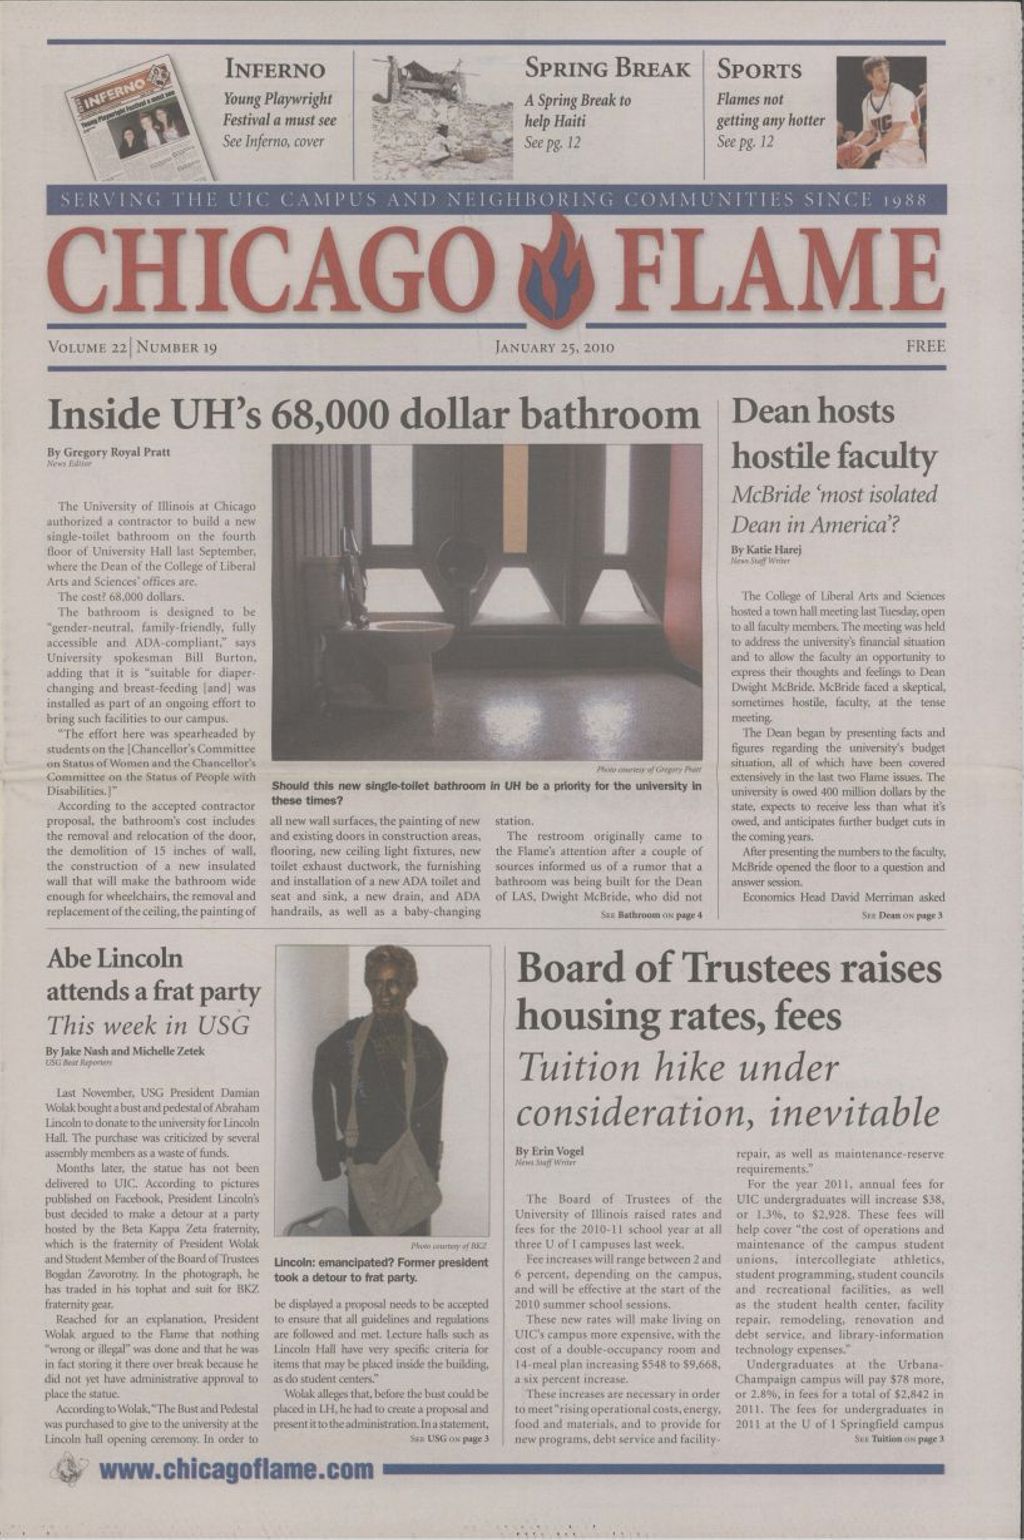 Miniature of Chicago Flame (January 25, 2010)